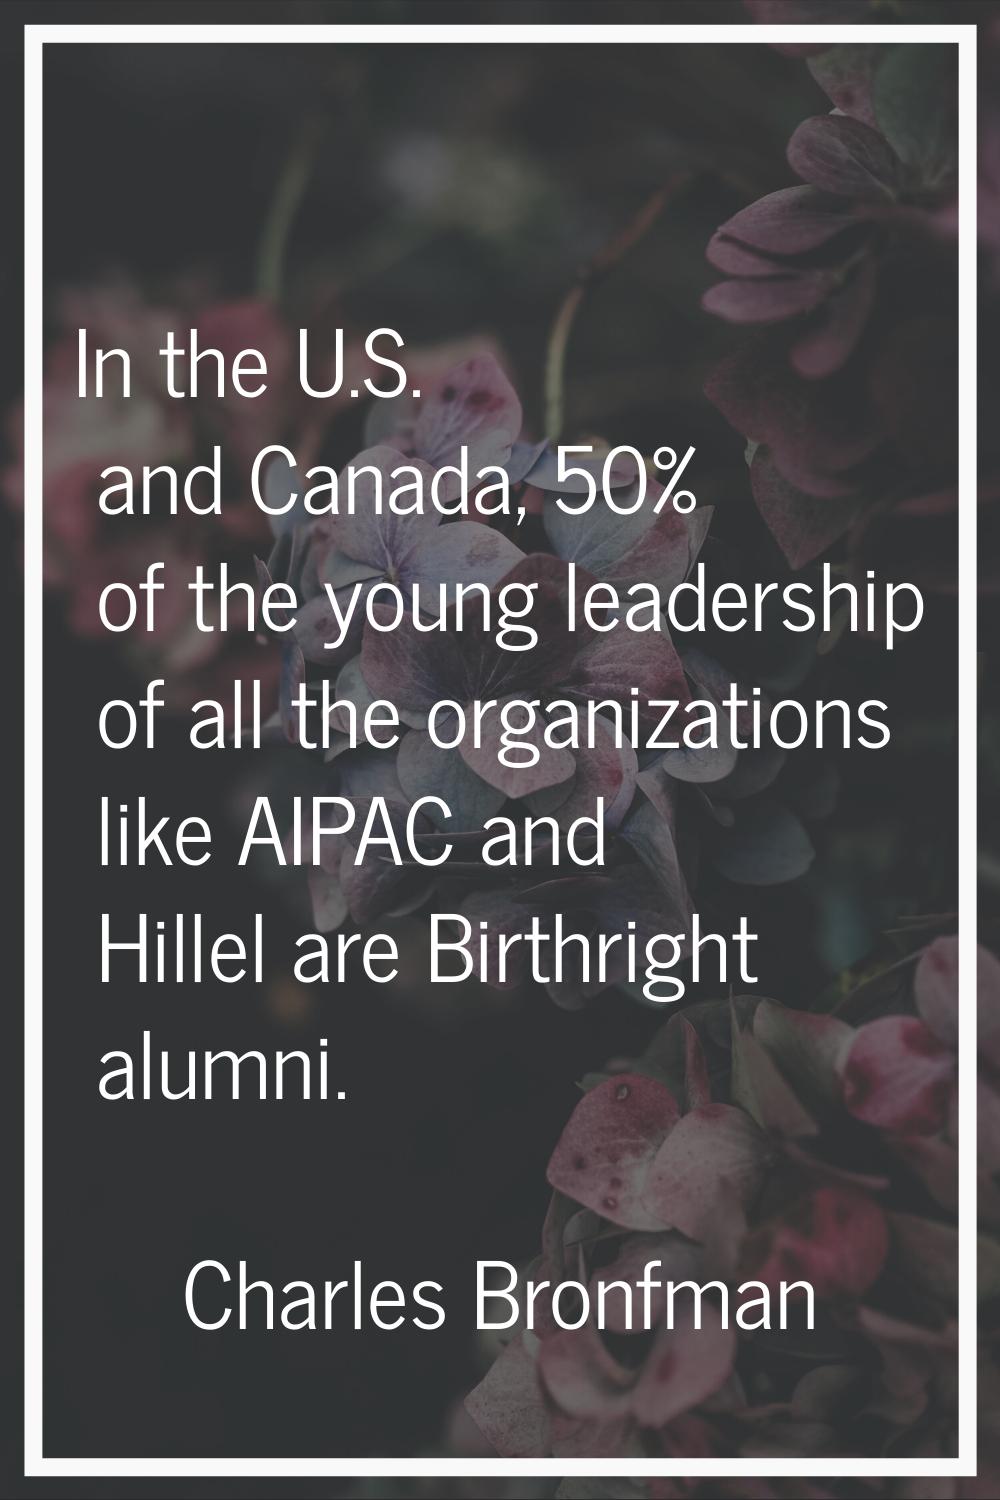 In the U.S. and Canada, 50% of the young leadership of all the organizations like AIPAC and Hillel 